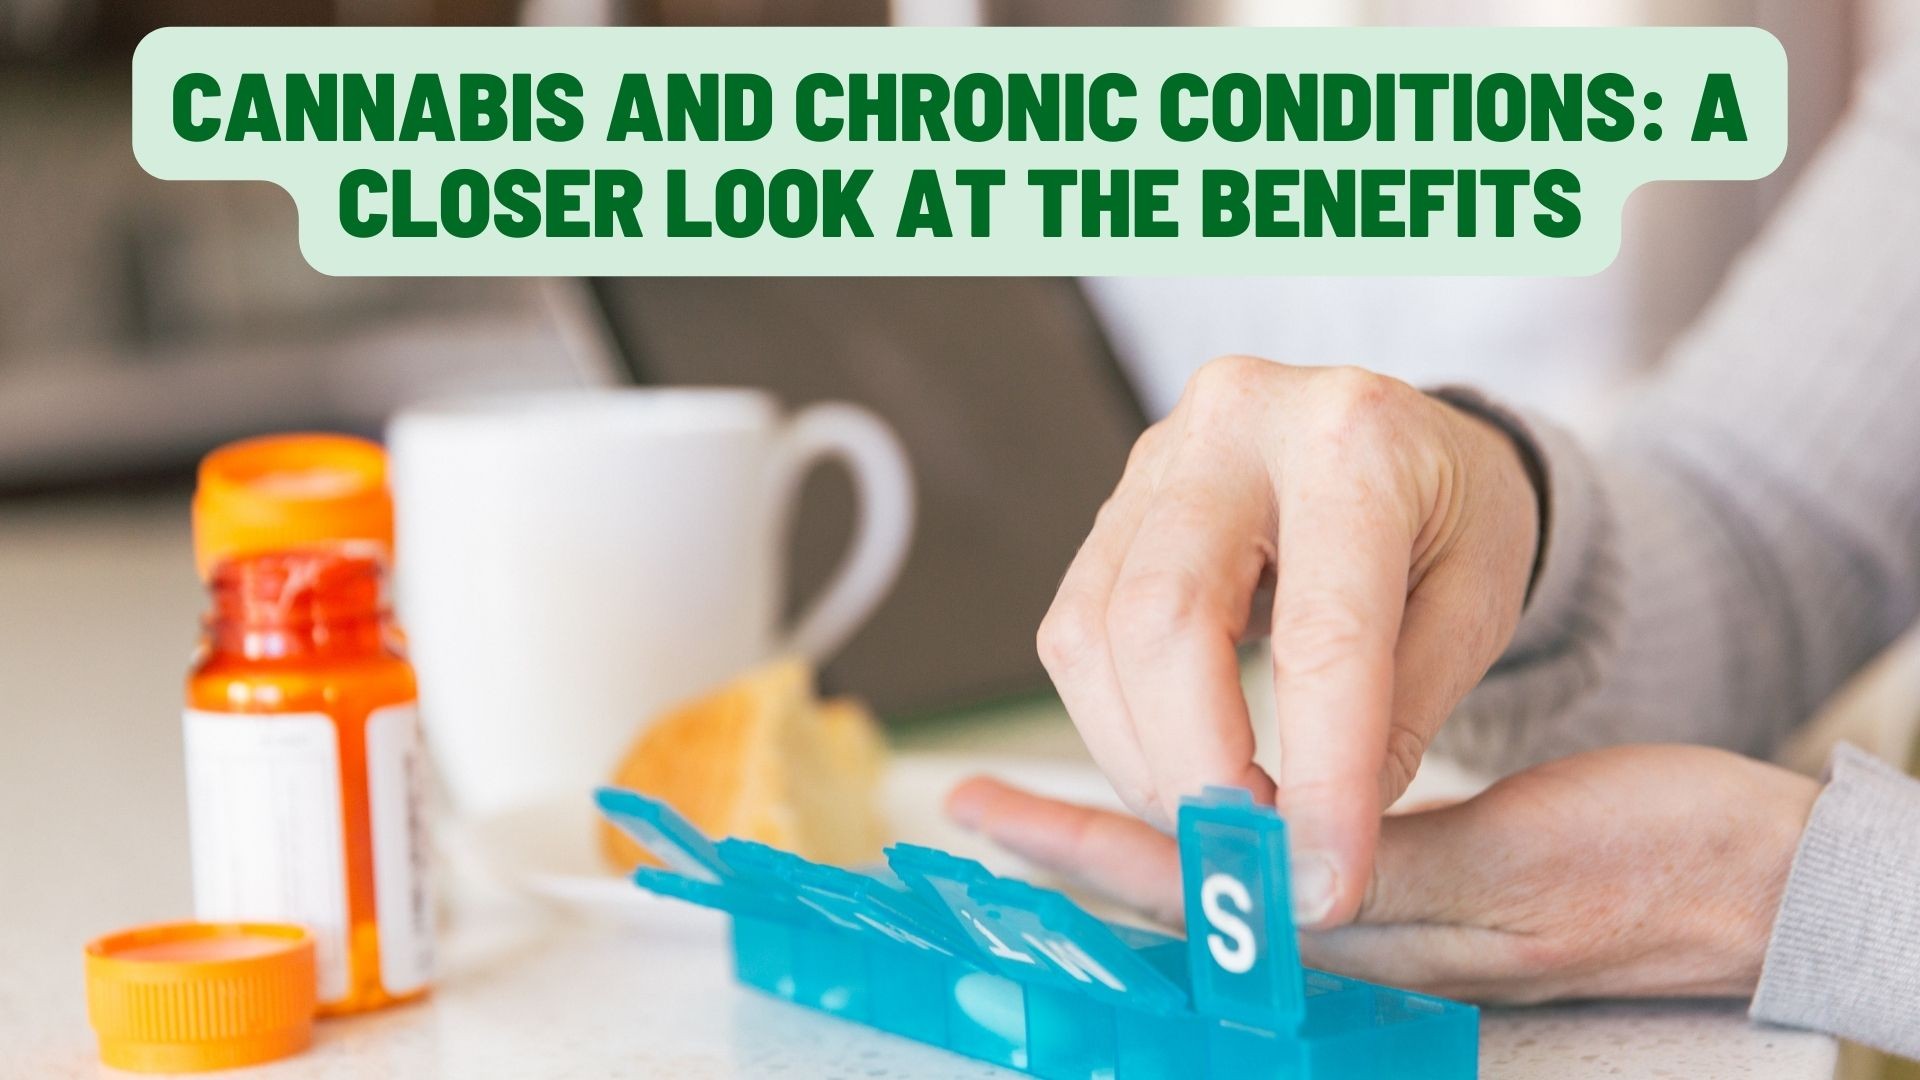 Cannabis and Chronic Conditions: A Closer Look at the Benefits